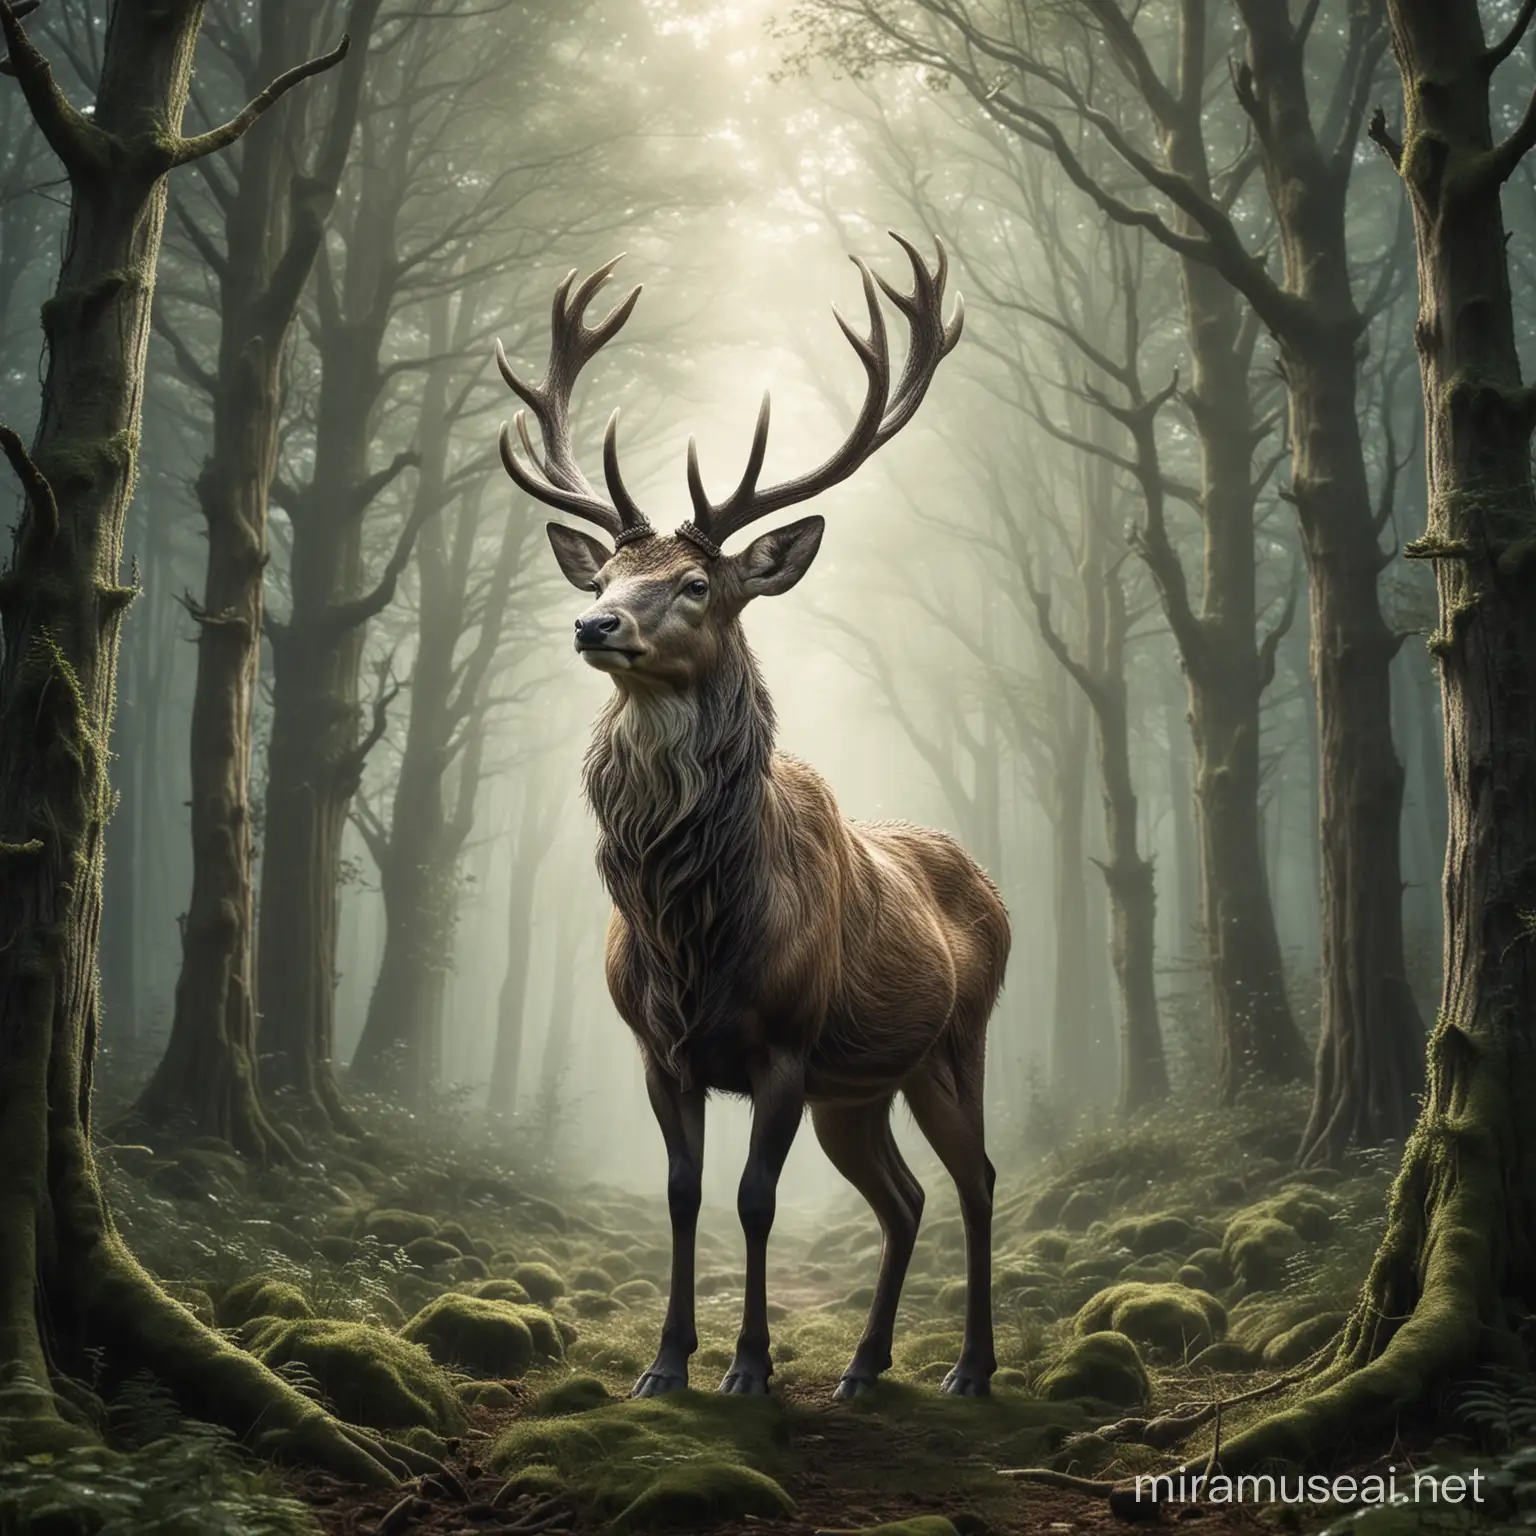 Majestic Stag Roaming through an Enchanted Forest